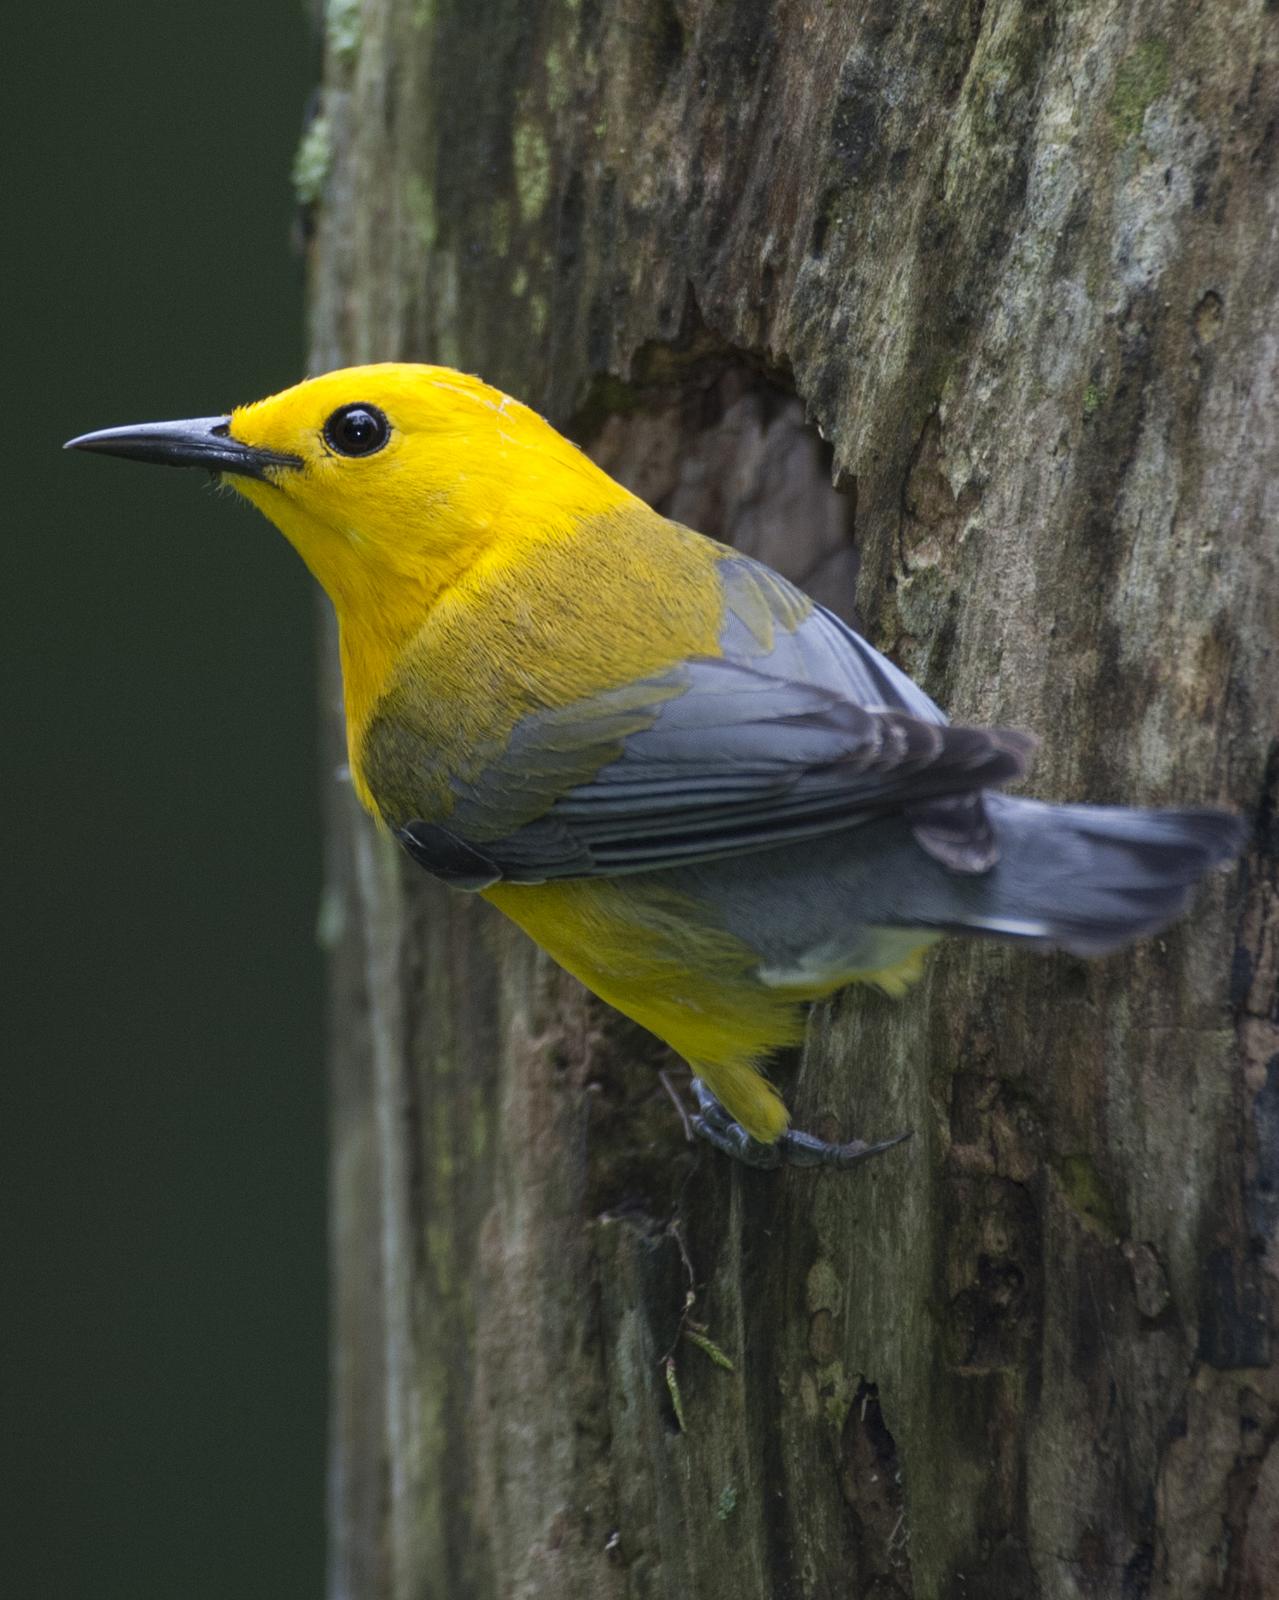 Prothonotary Warbler Photo by Jeff Moore